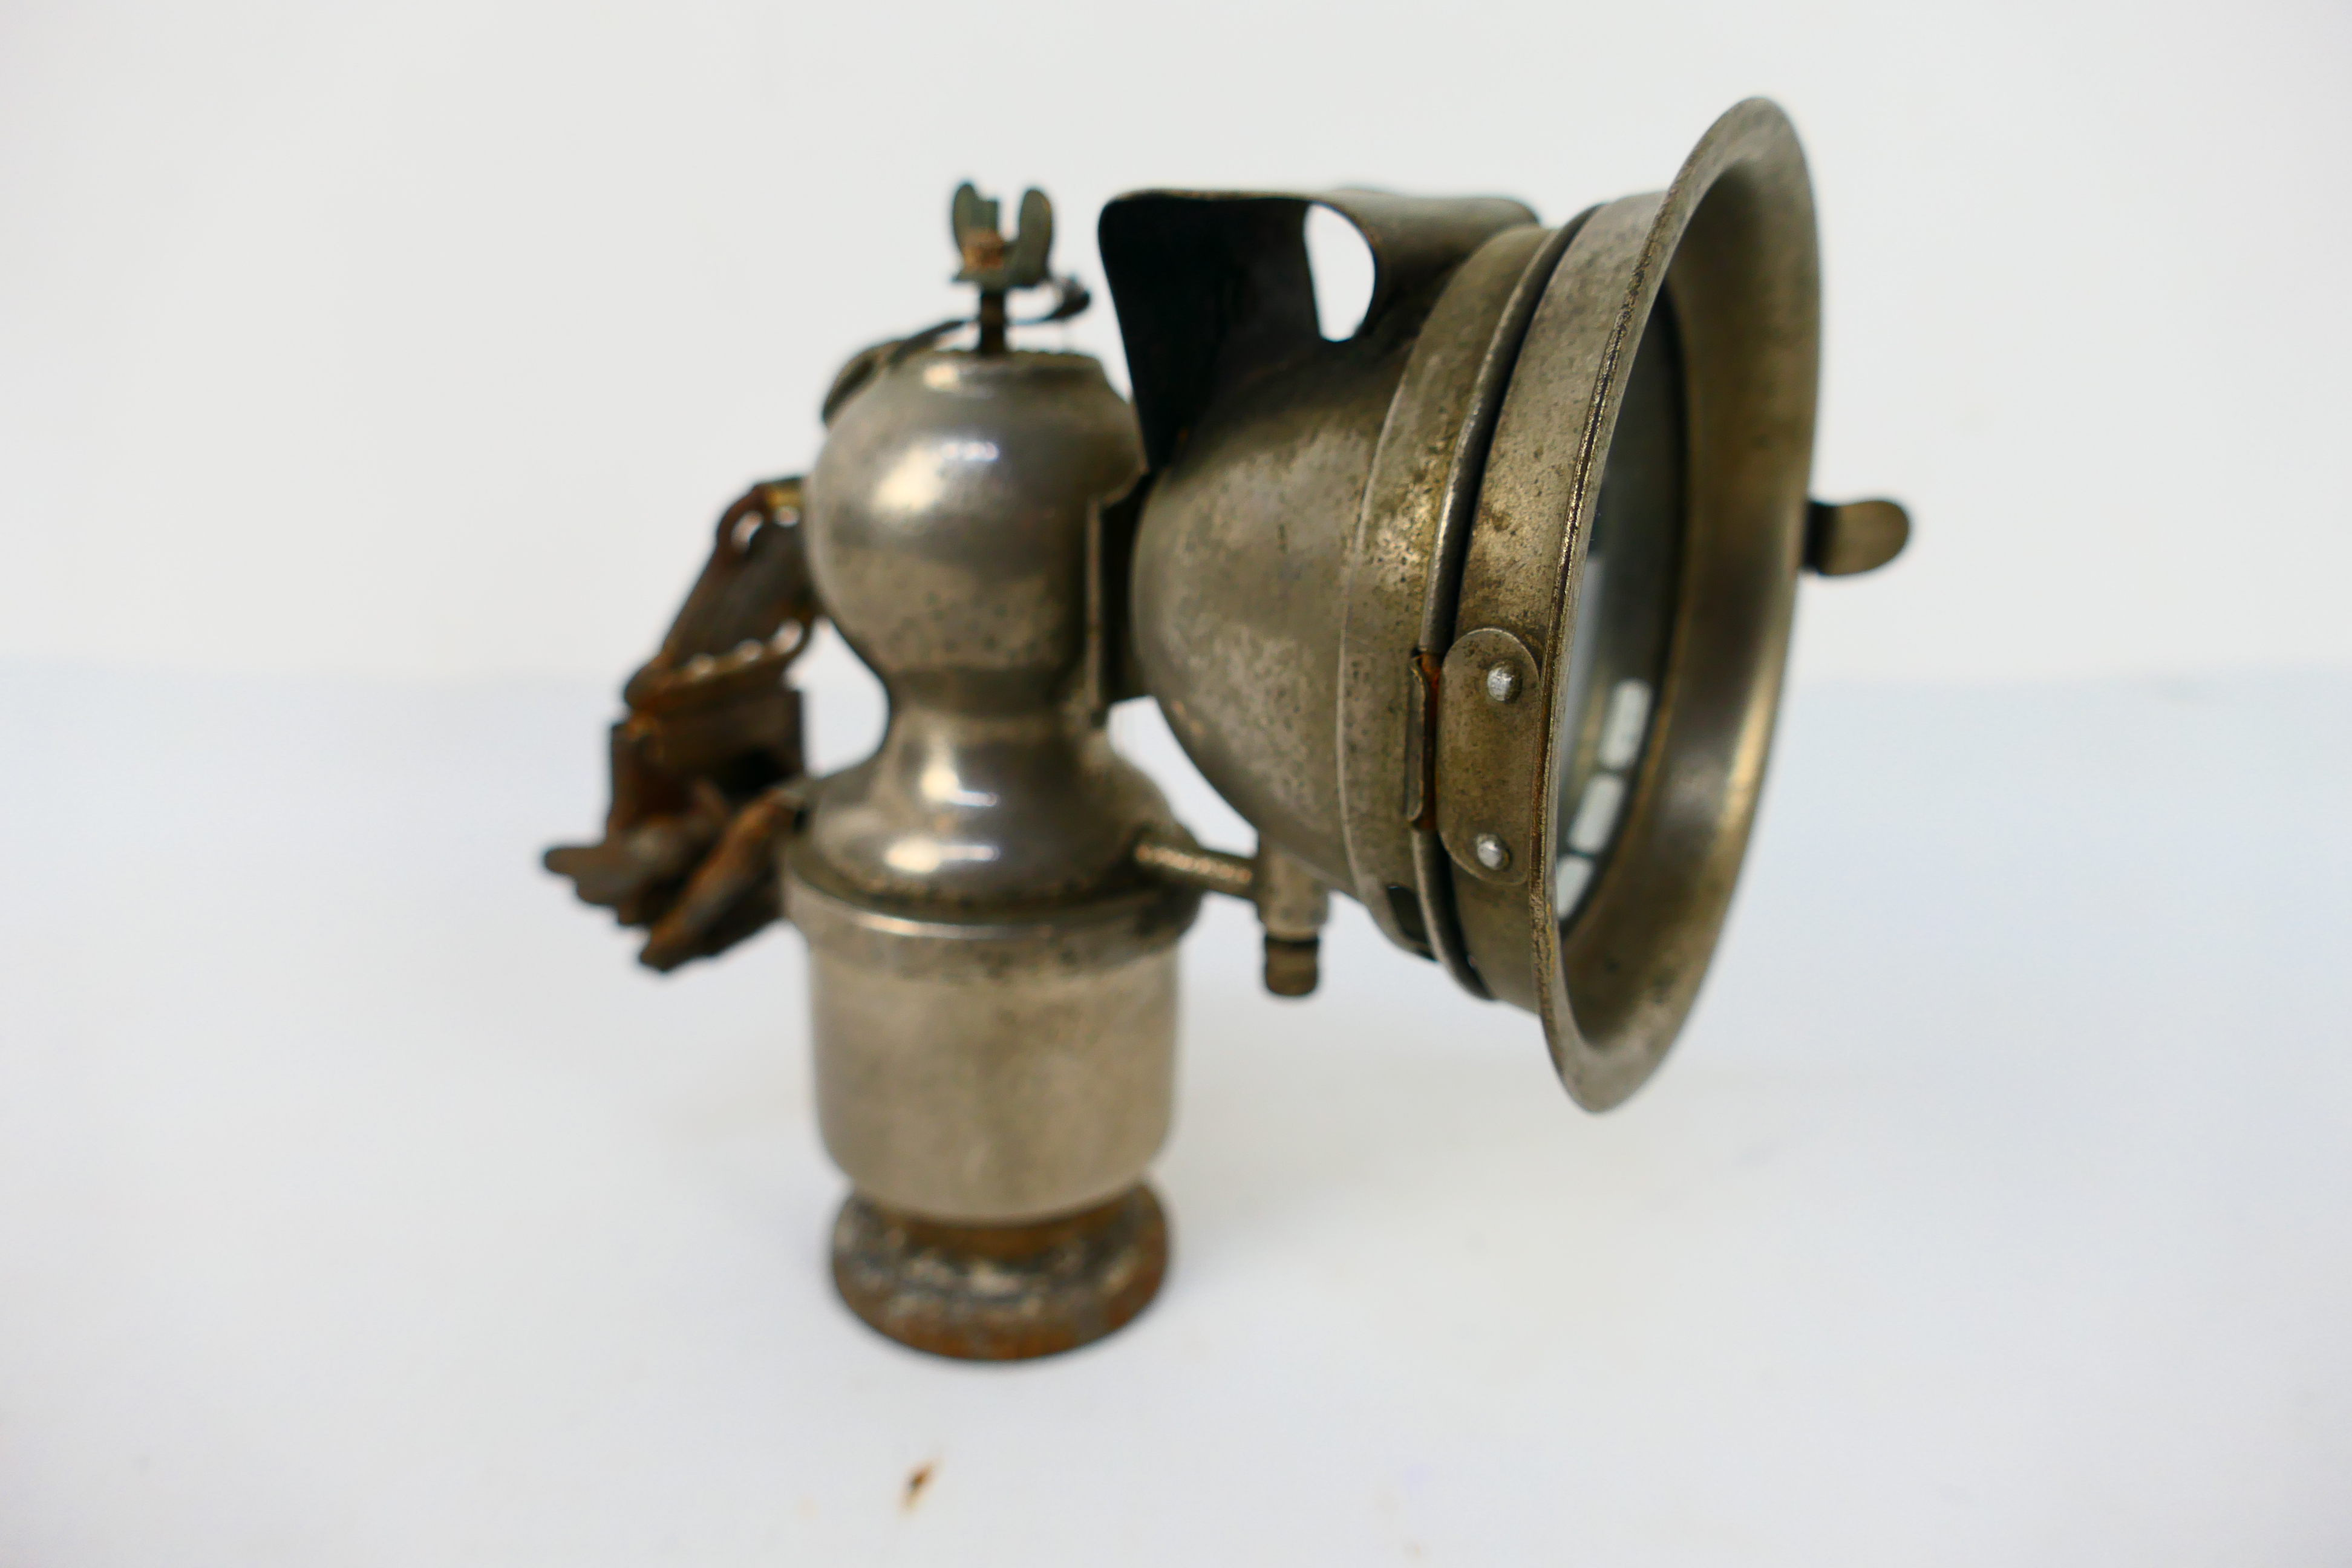 A vintage acetylene or carbide bicycle lamp with 2¾" clear glass lens, approximately 15 cm (h).